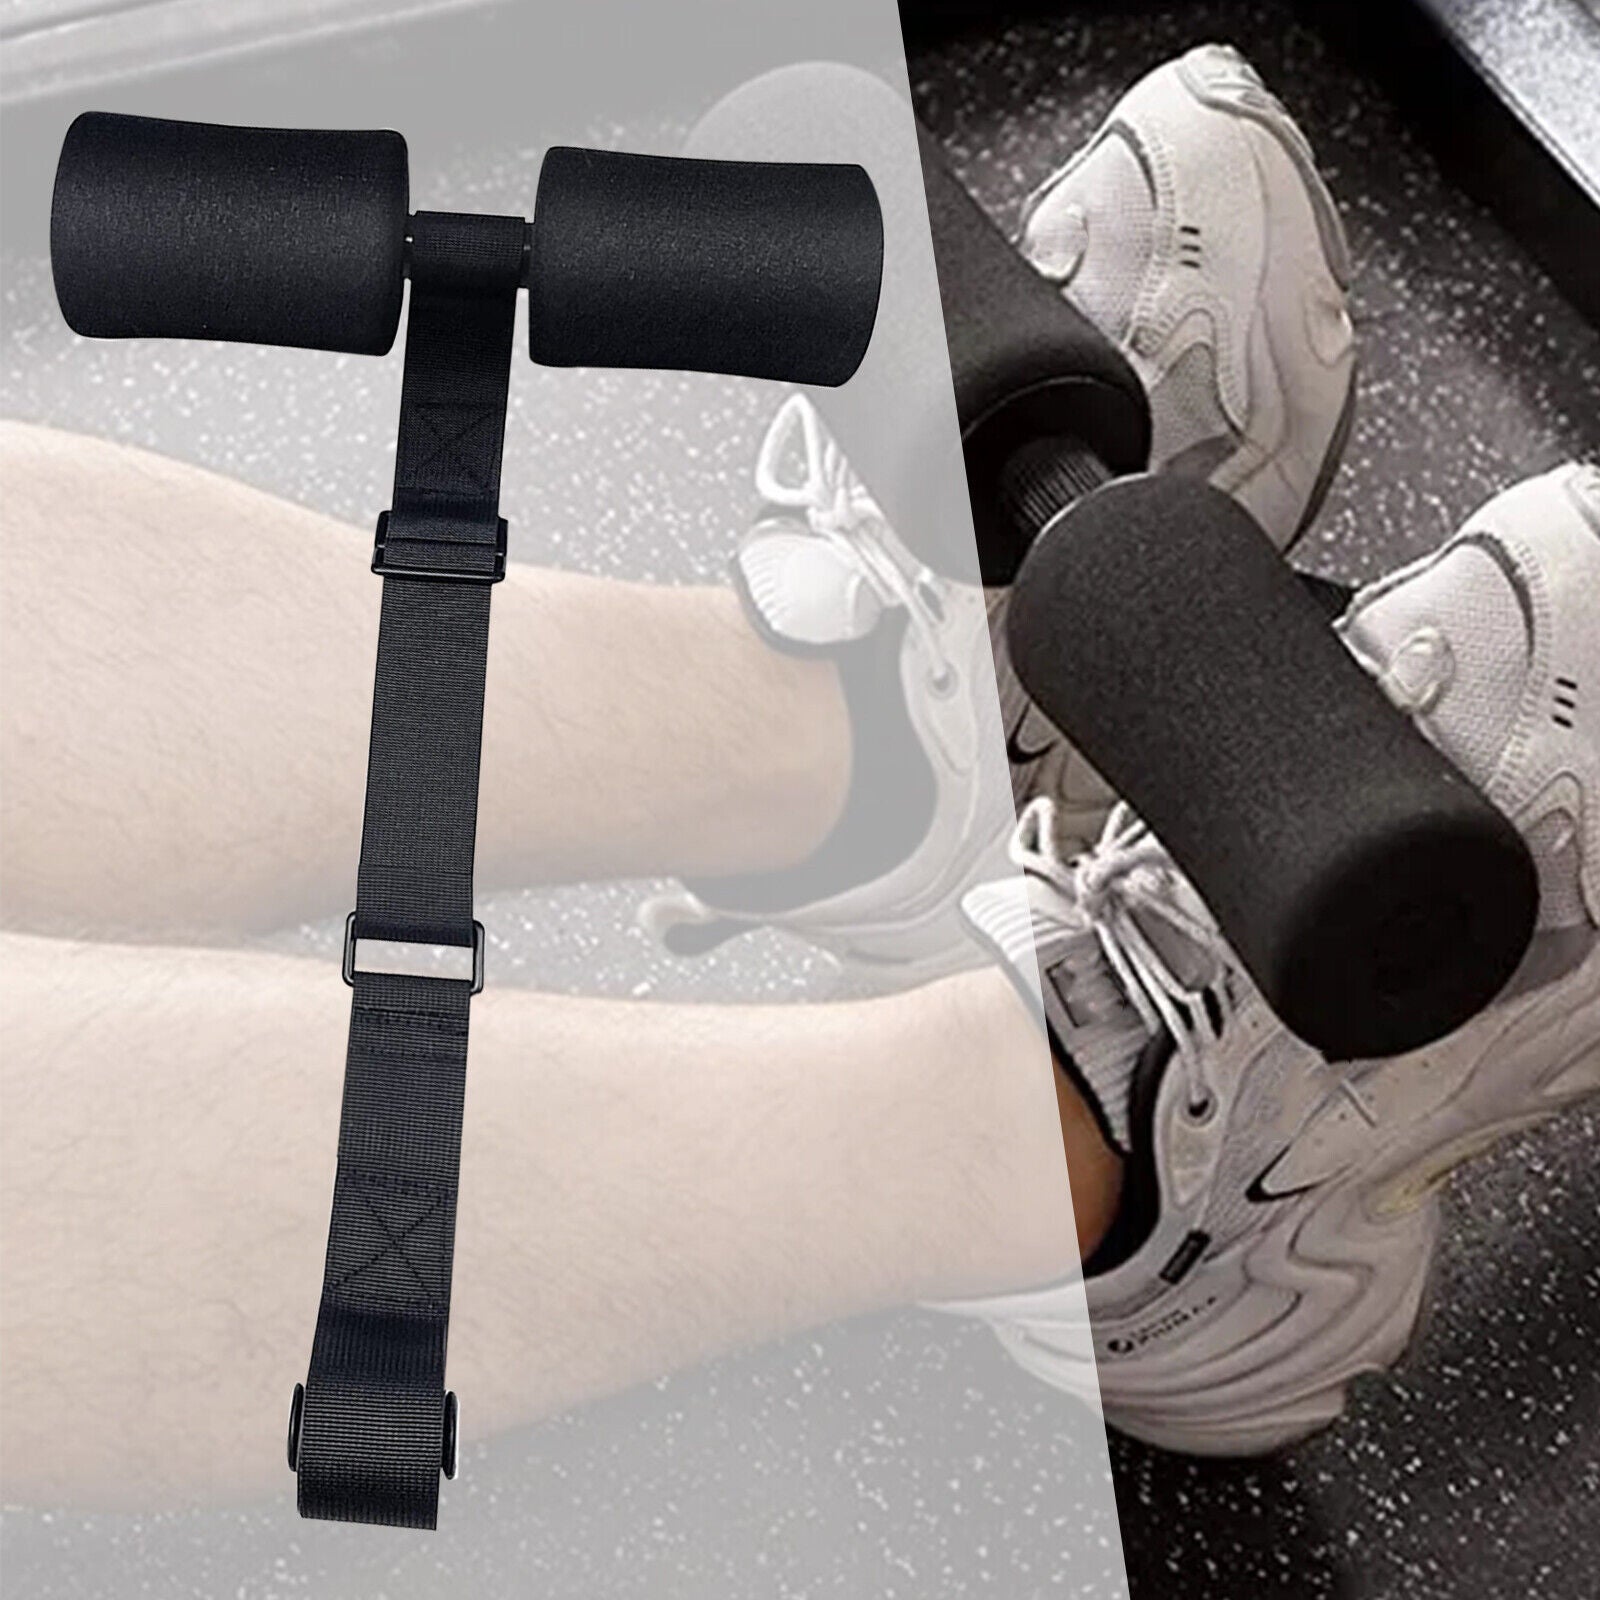 Nordic Hamstring Exercise Equipment - Fitness Fuse